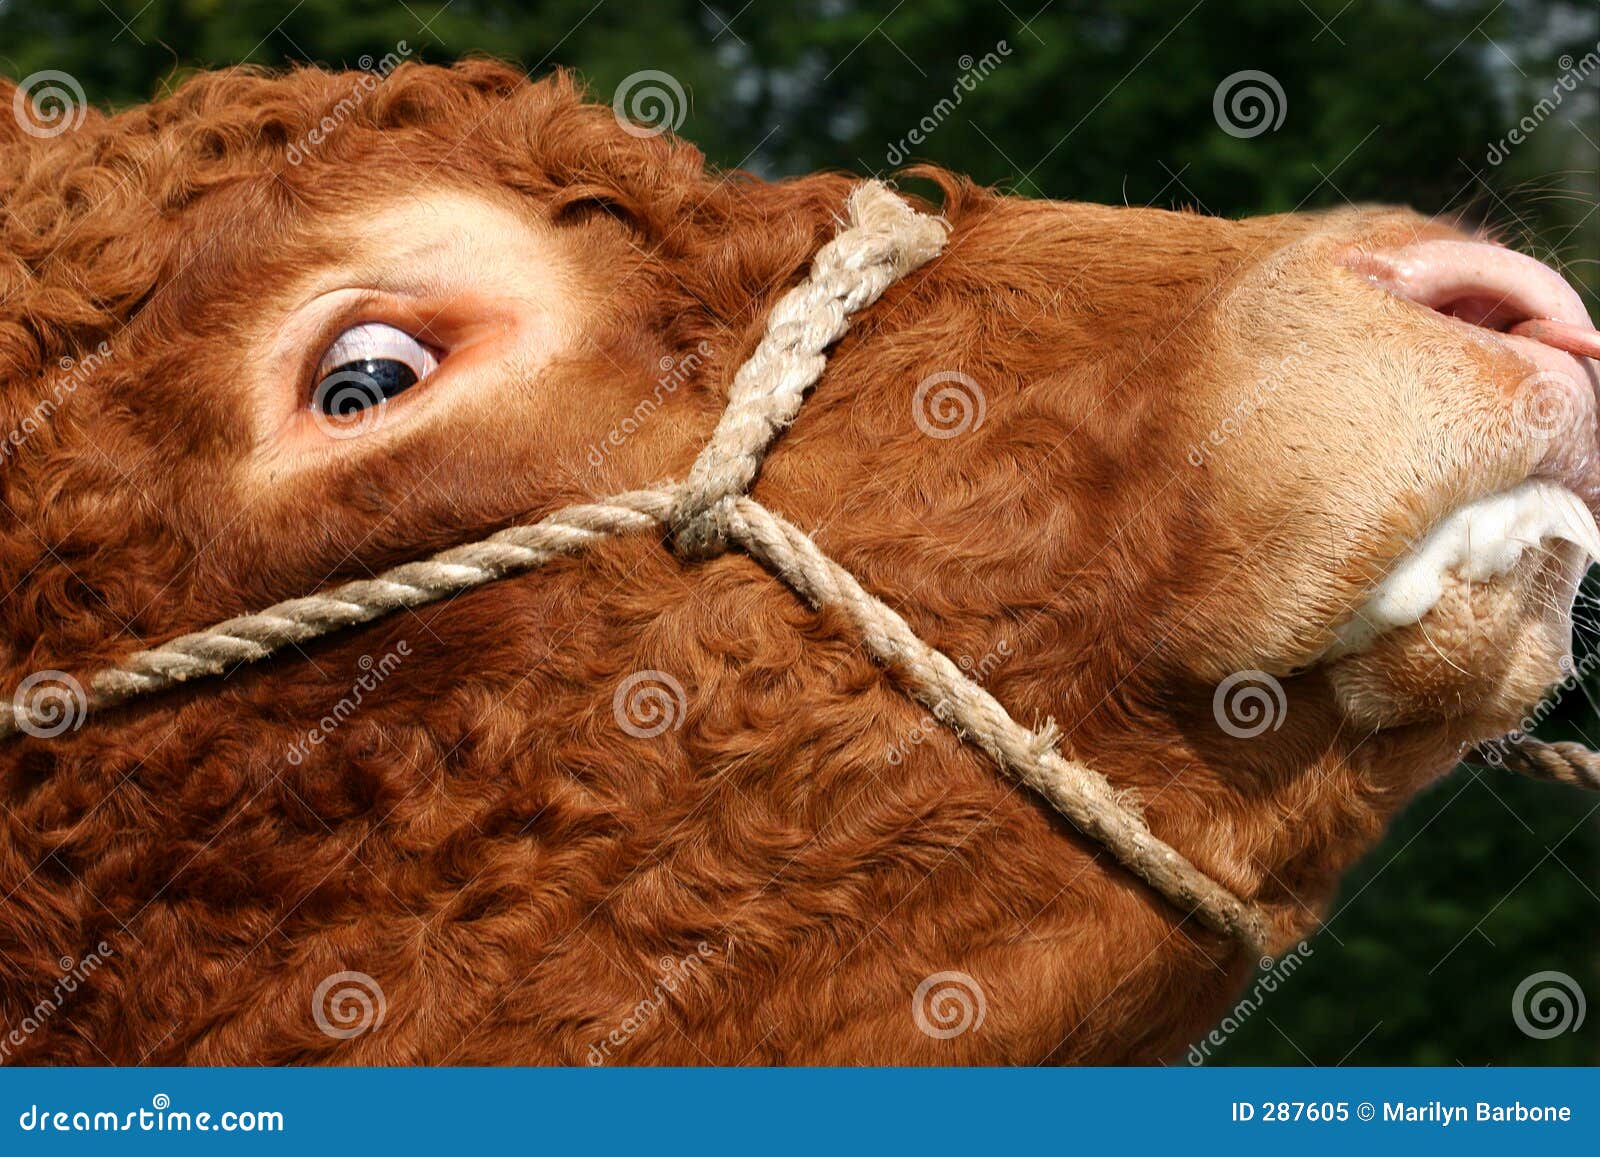 A Chained Up Mad Cow With A Foaming Mouth Stock Photo Download Image